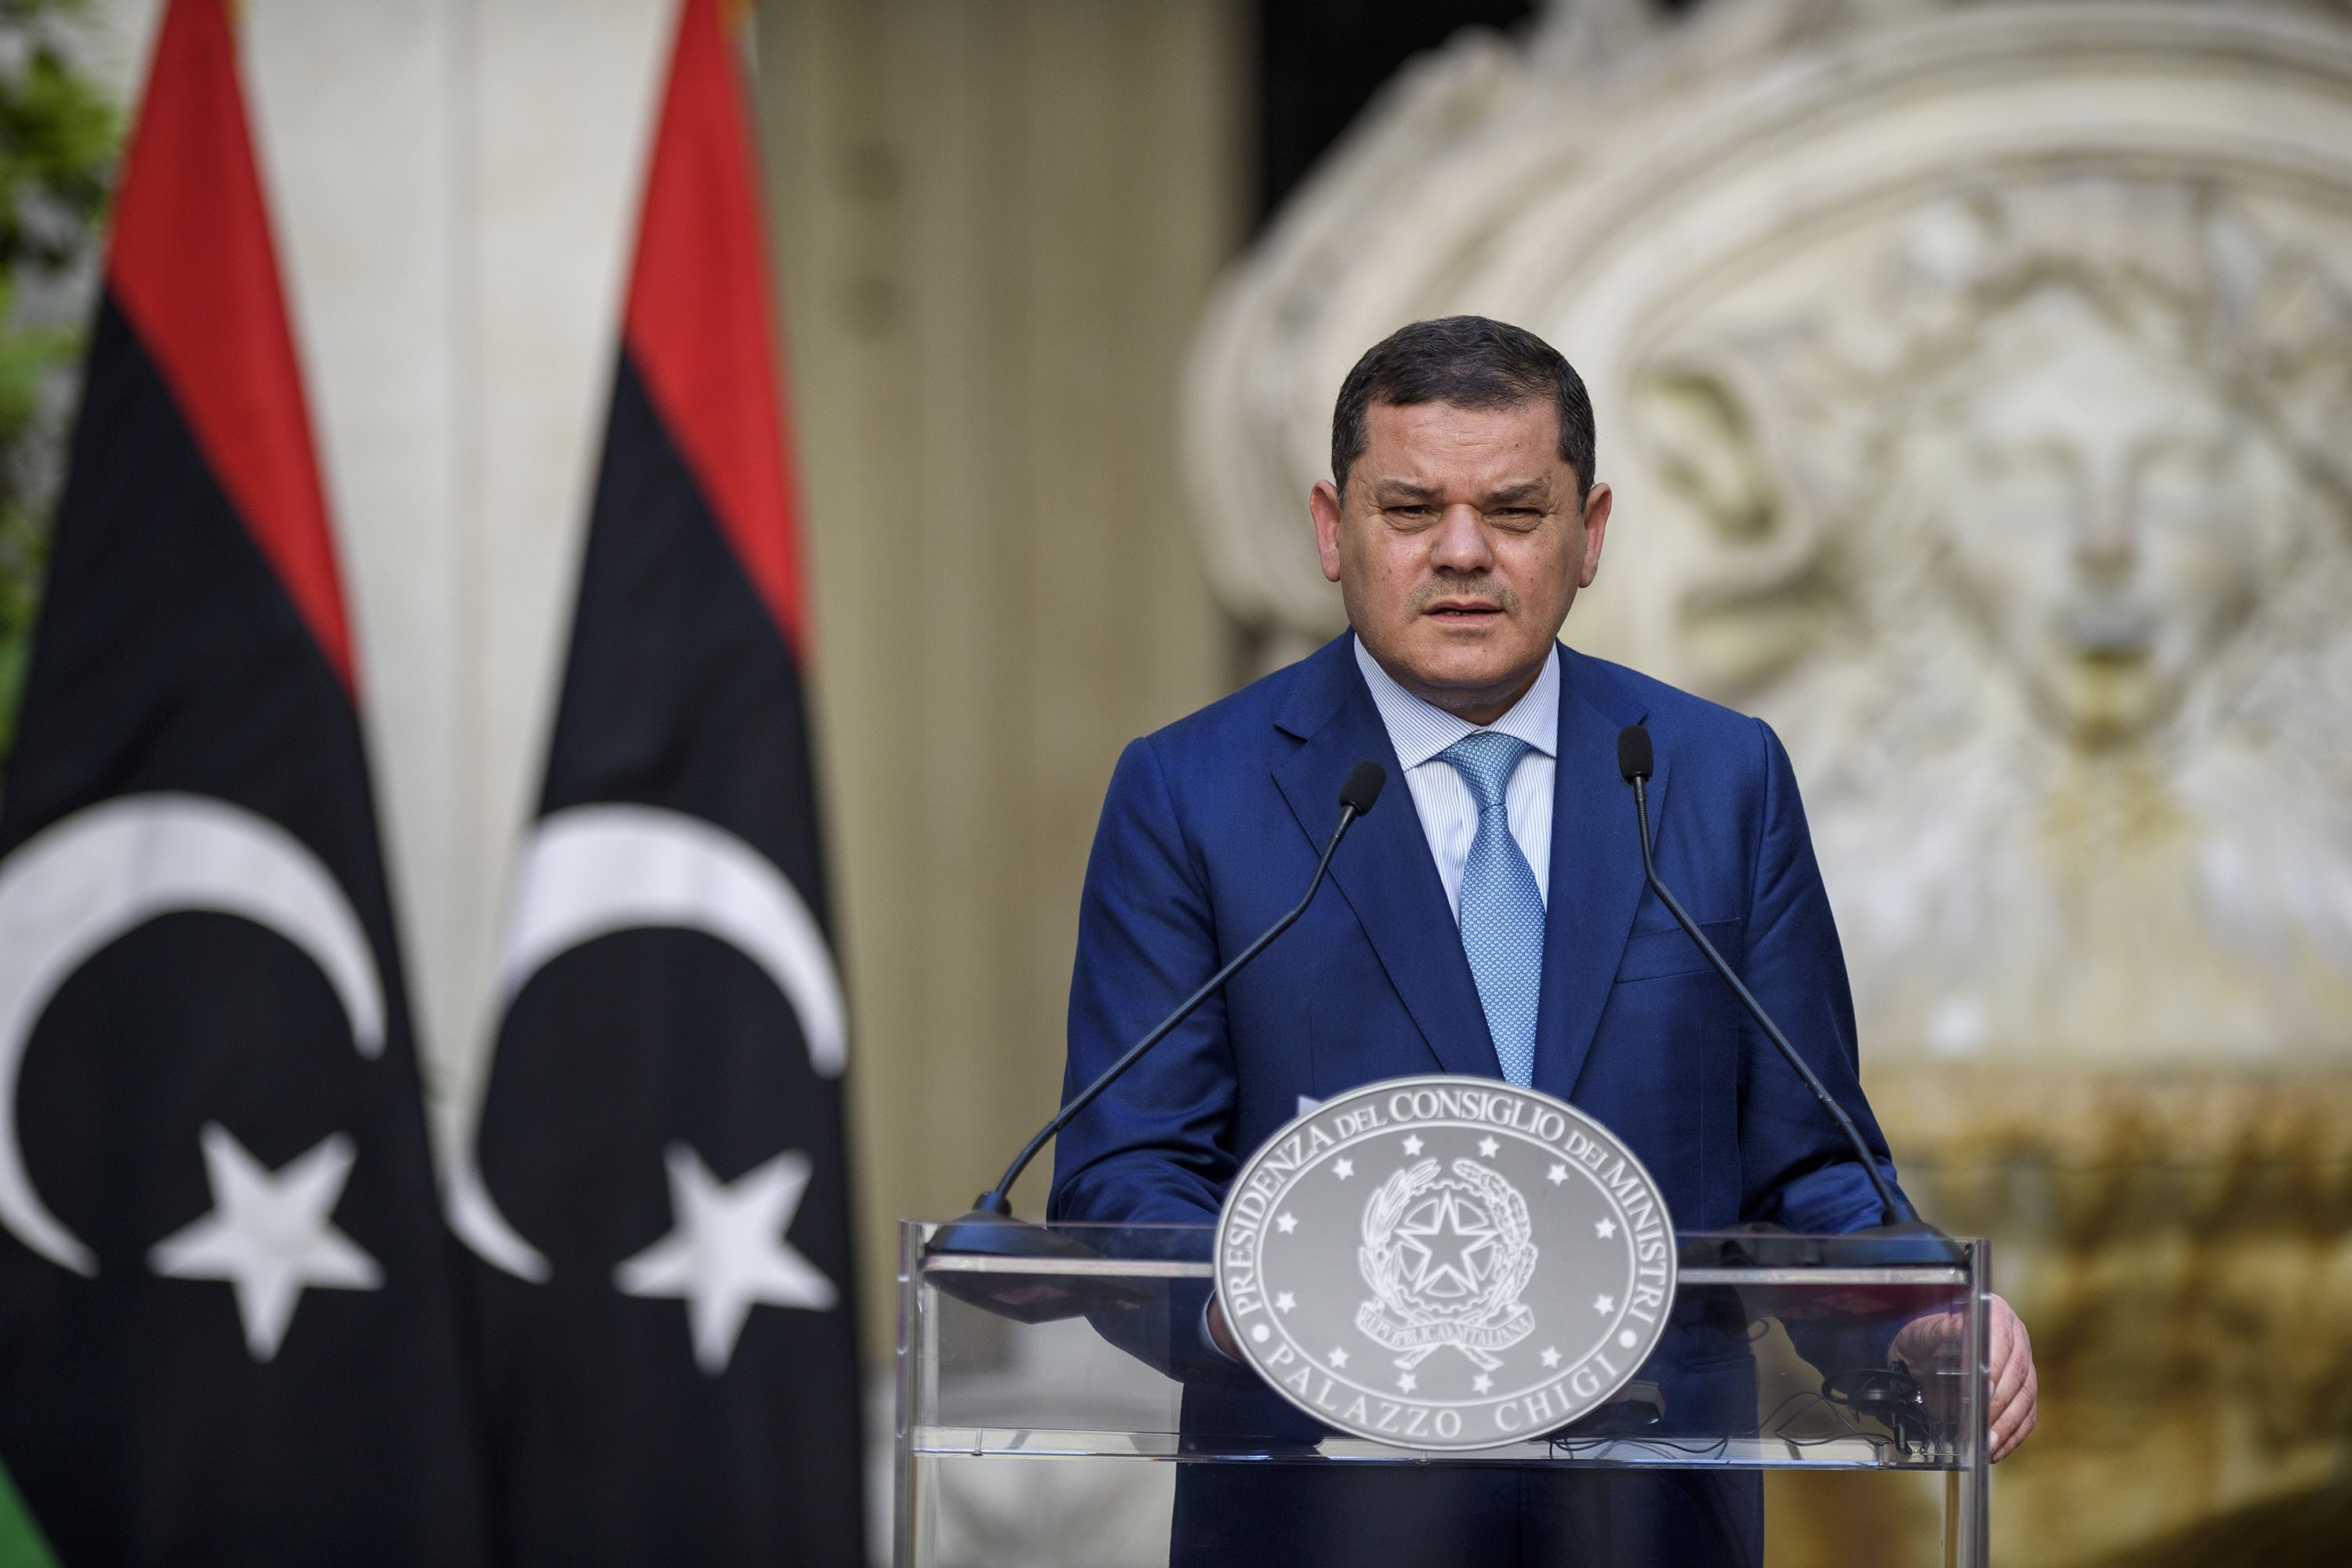 Libyan Prime Minister Abdul Hamid Mohammed Dbeibah holds a joint press conference with Italian Prime Minister Mario Draghi (not pictured) after a meeting at Palazzo Chigi in Rome, Italy on May 31, 2021. (Getty Images Photo)